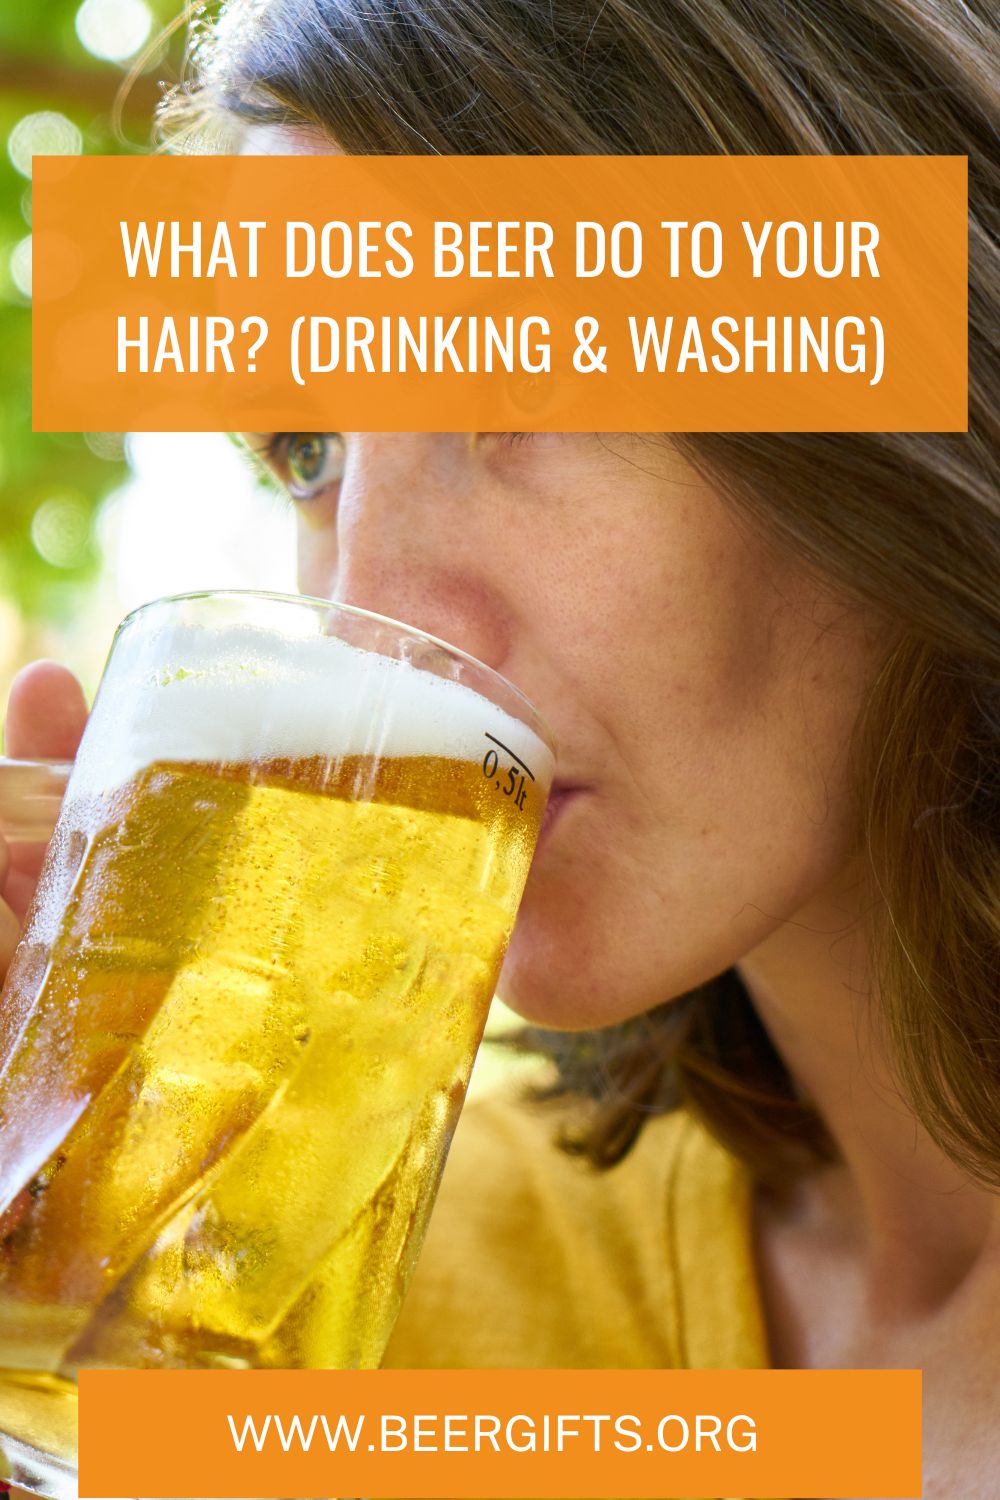 What Does Beer Do to Your Hair? (Drinking & Washing)1